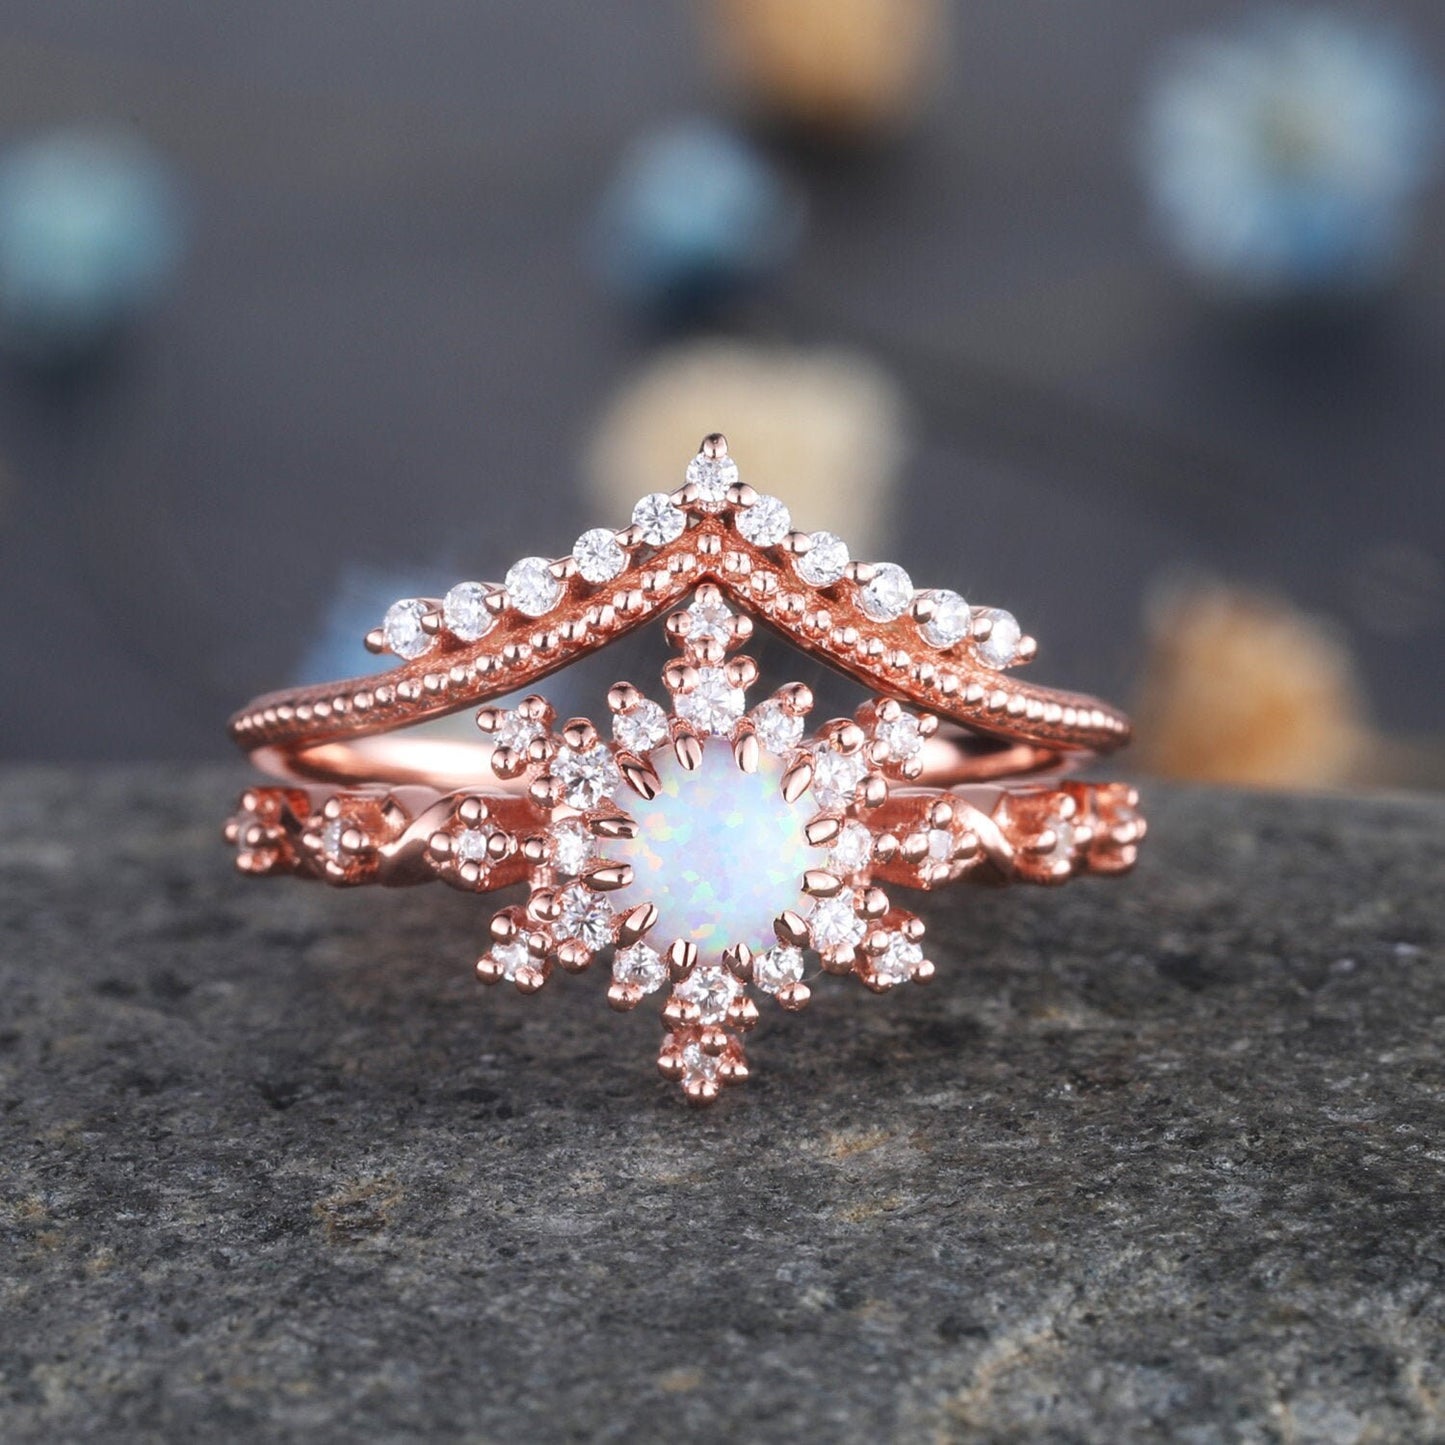 Opal Engagement Ring Rose Gold Set Diamond Wedding Band Milgrain Curved Matching Band Vintage Women Bridal Jewelry Gifts For Her